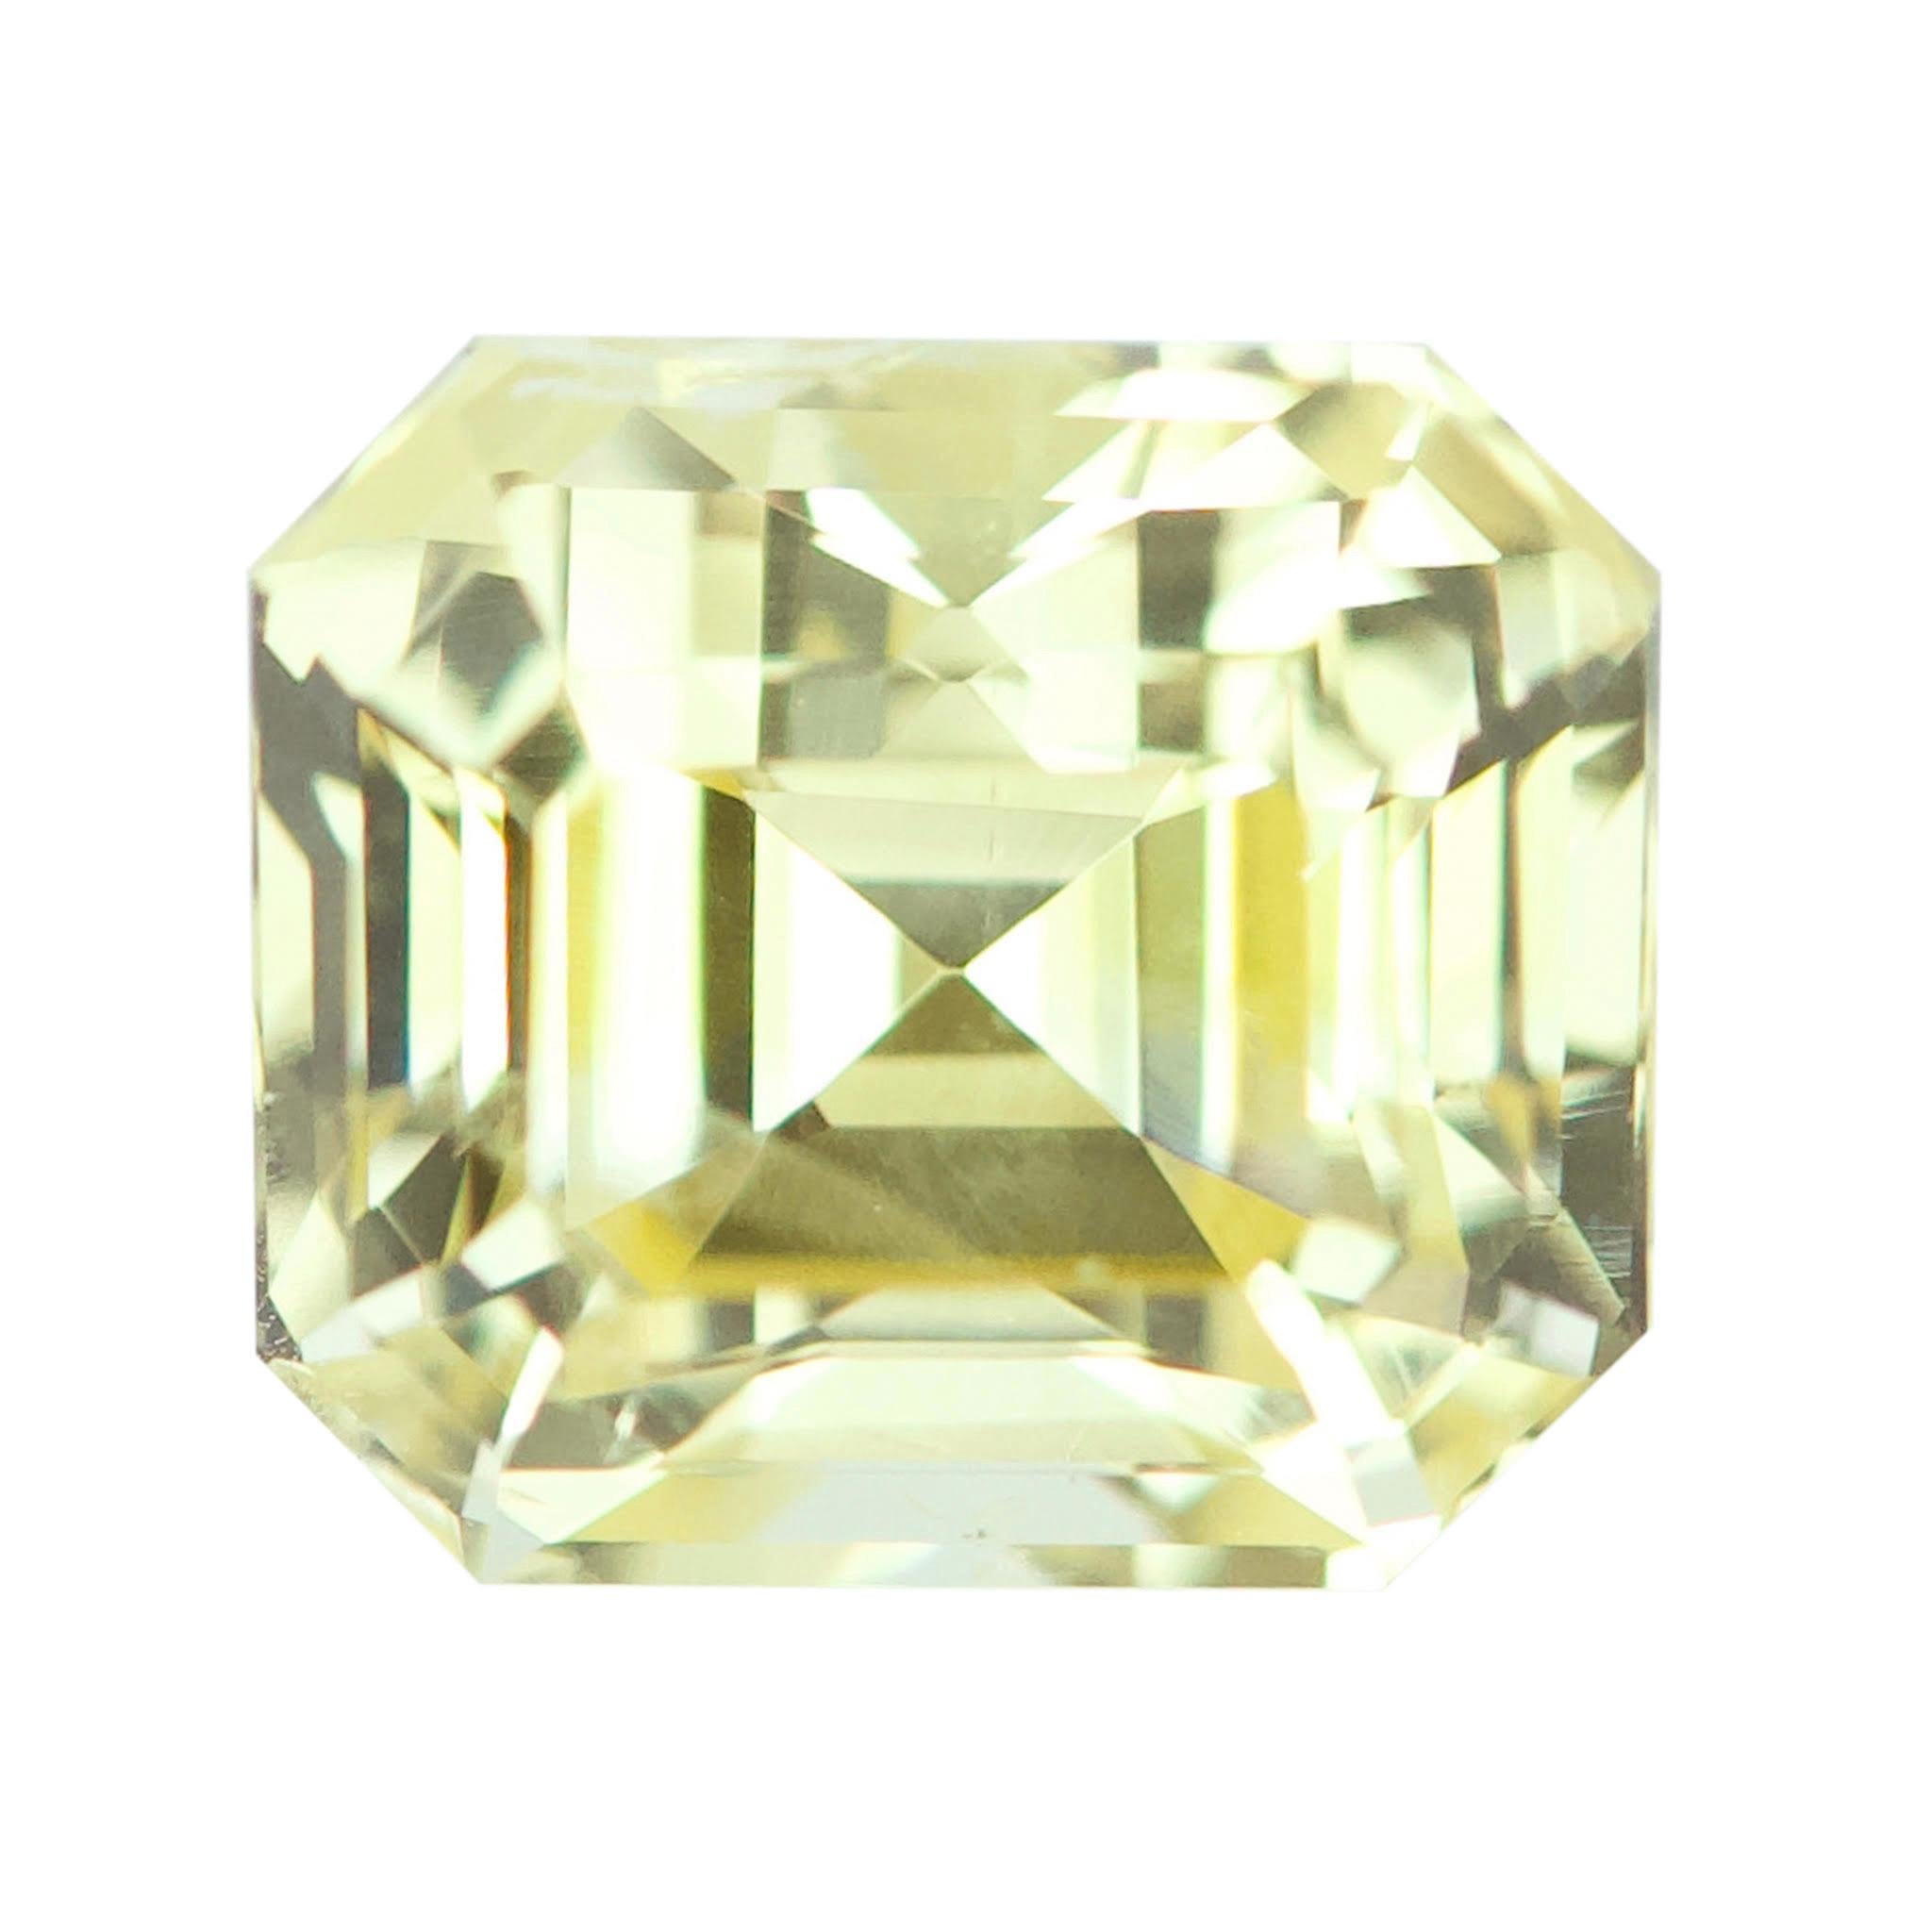 Leave a lasting impression with a fabulous custom made jewel using this large 2.64 carat skilfully emerald cut yellow sapphire as the centrepiece stone or accompanied by some diamond side highlight stones. With a pedigree birthplace in Sri Lanka